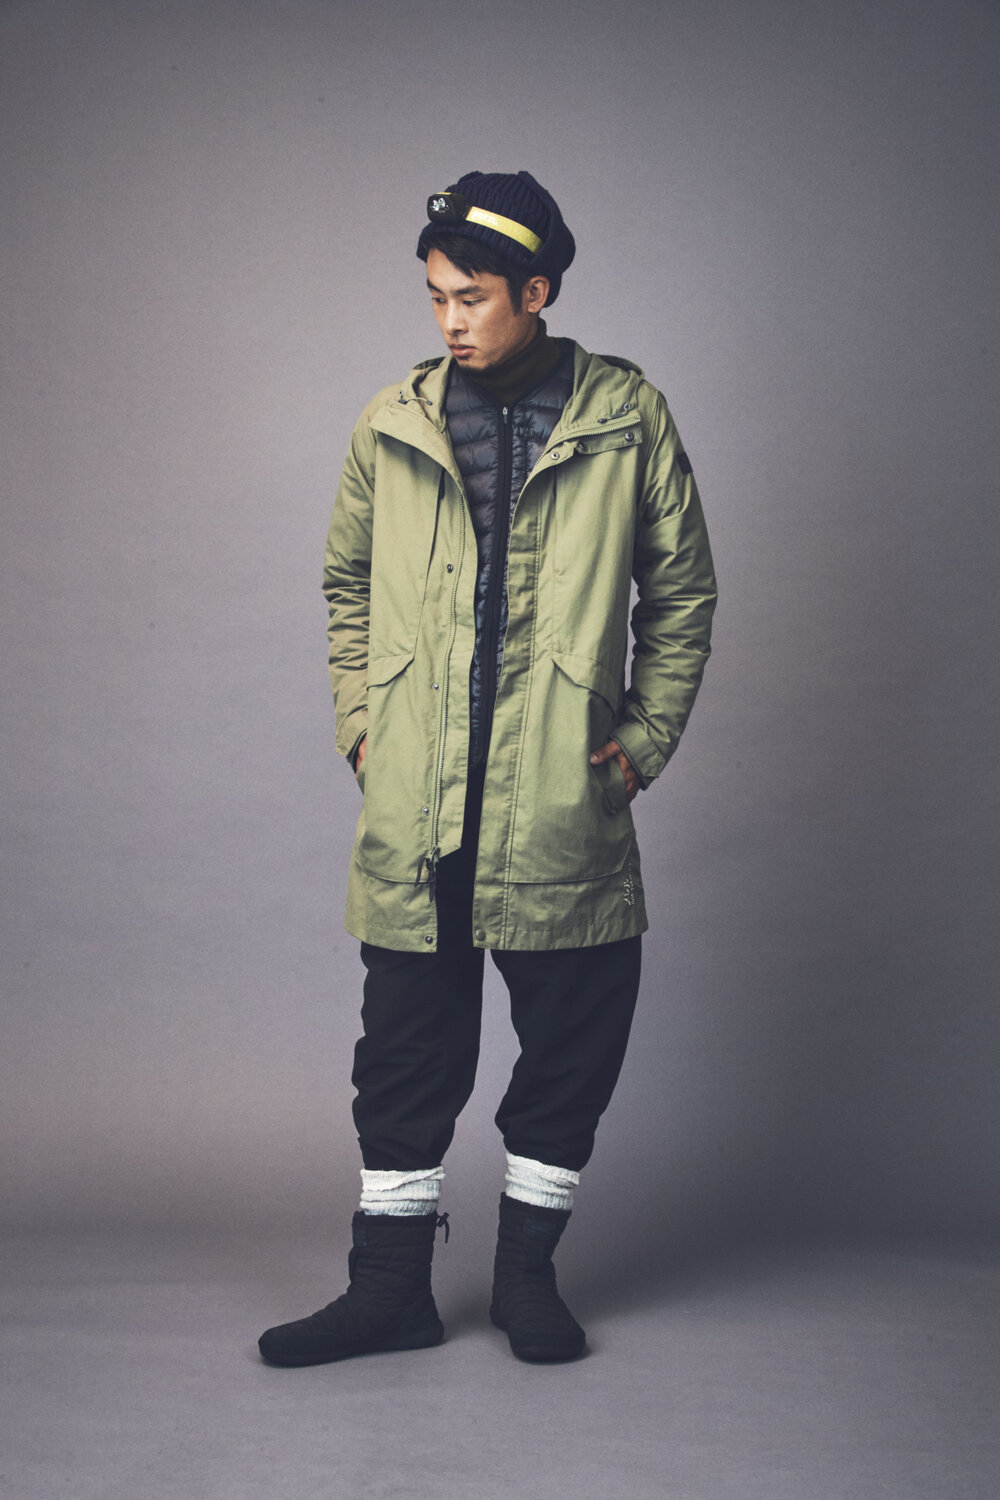 MERRELL Combines Performance With Comfort In Their 'Japan Capsule' — eye_C